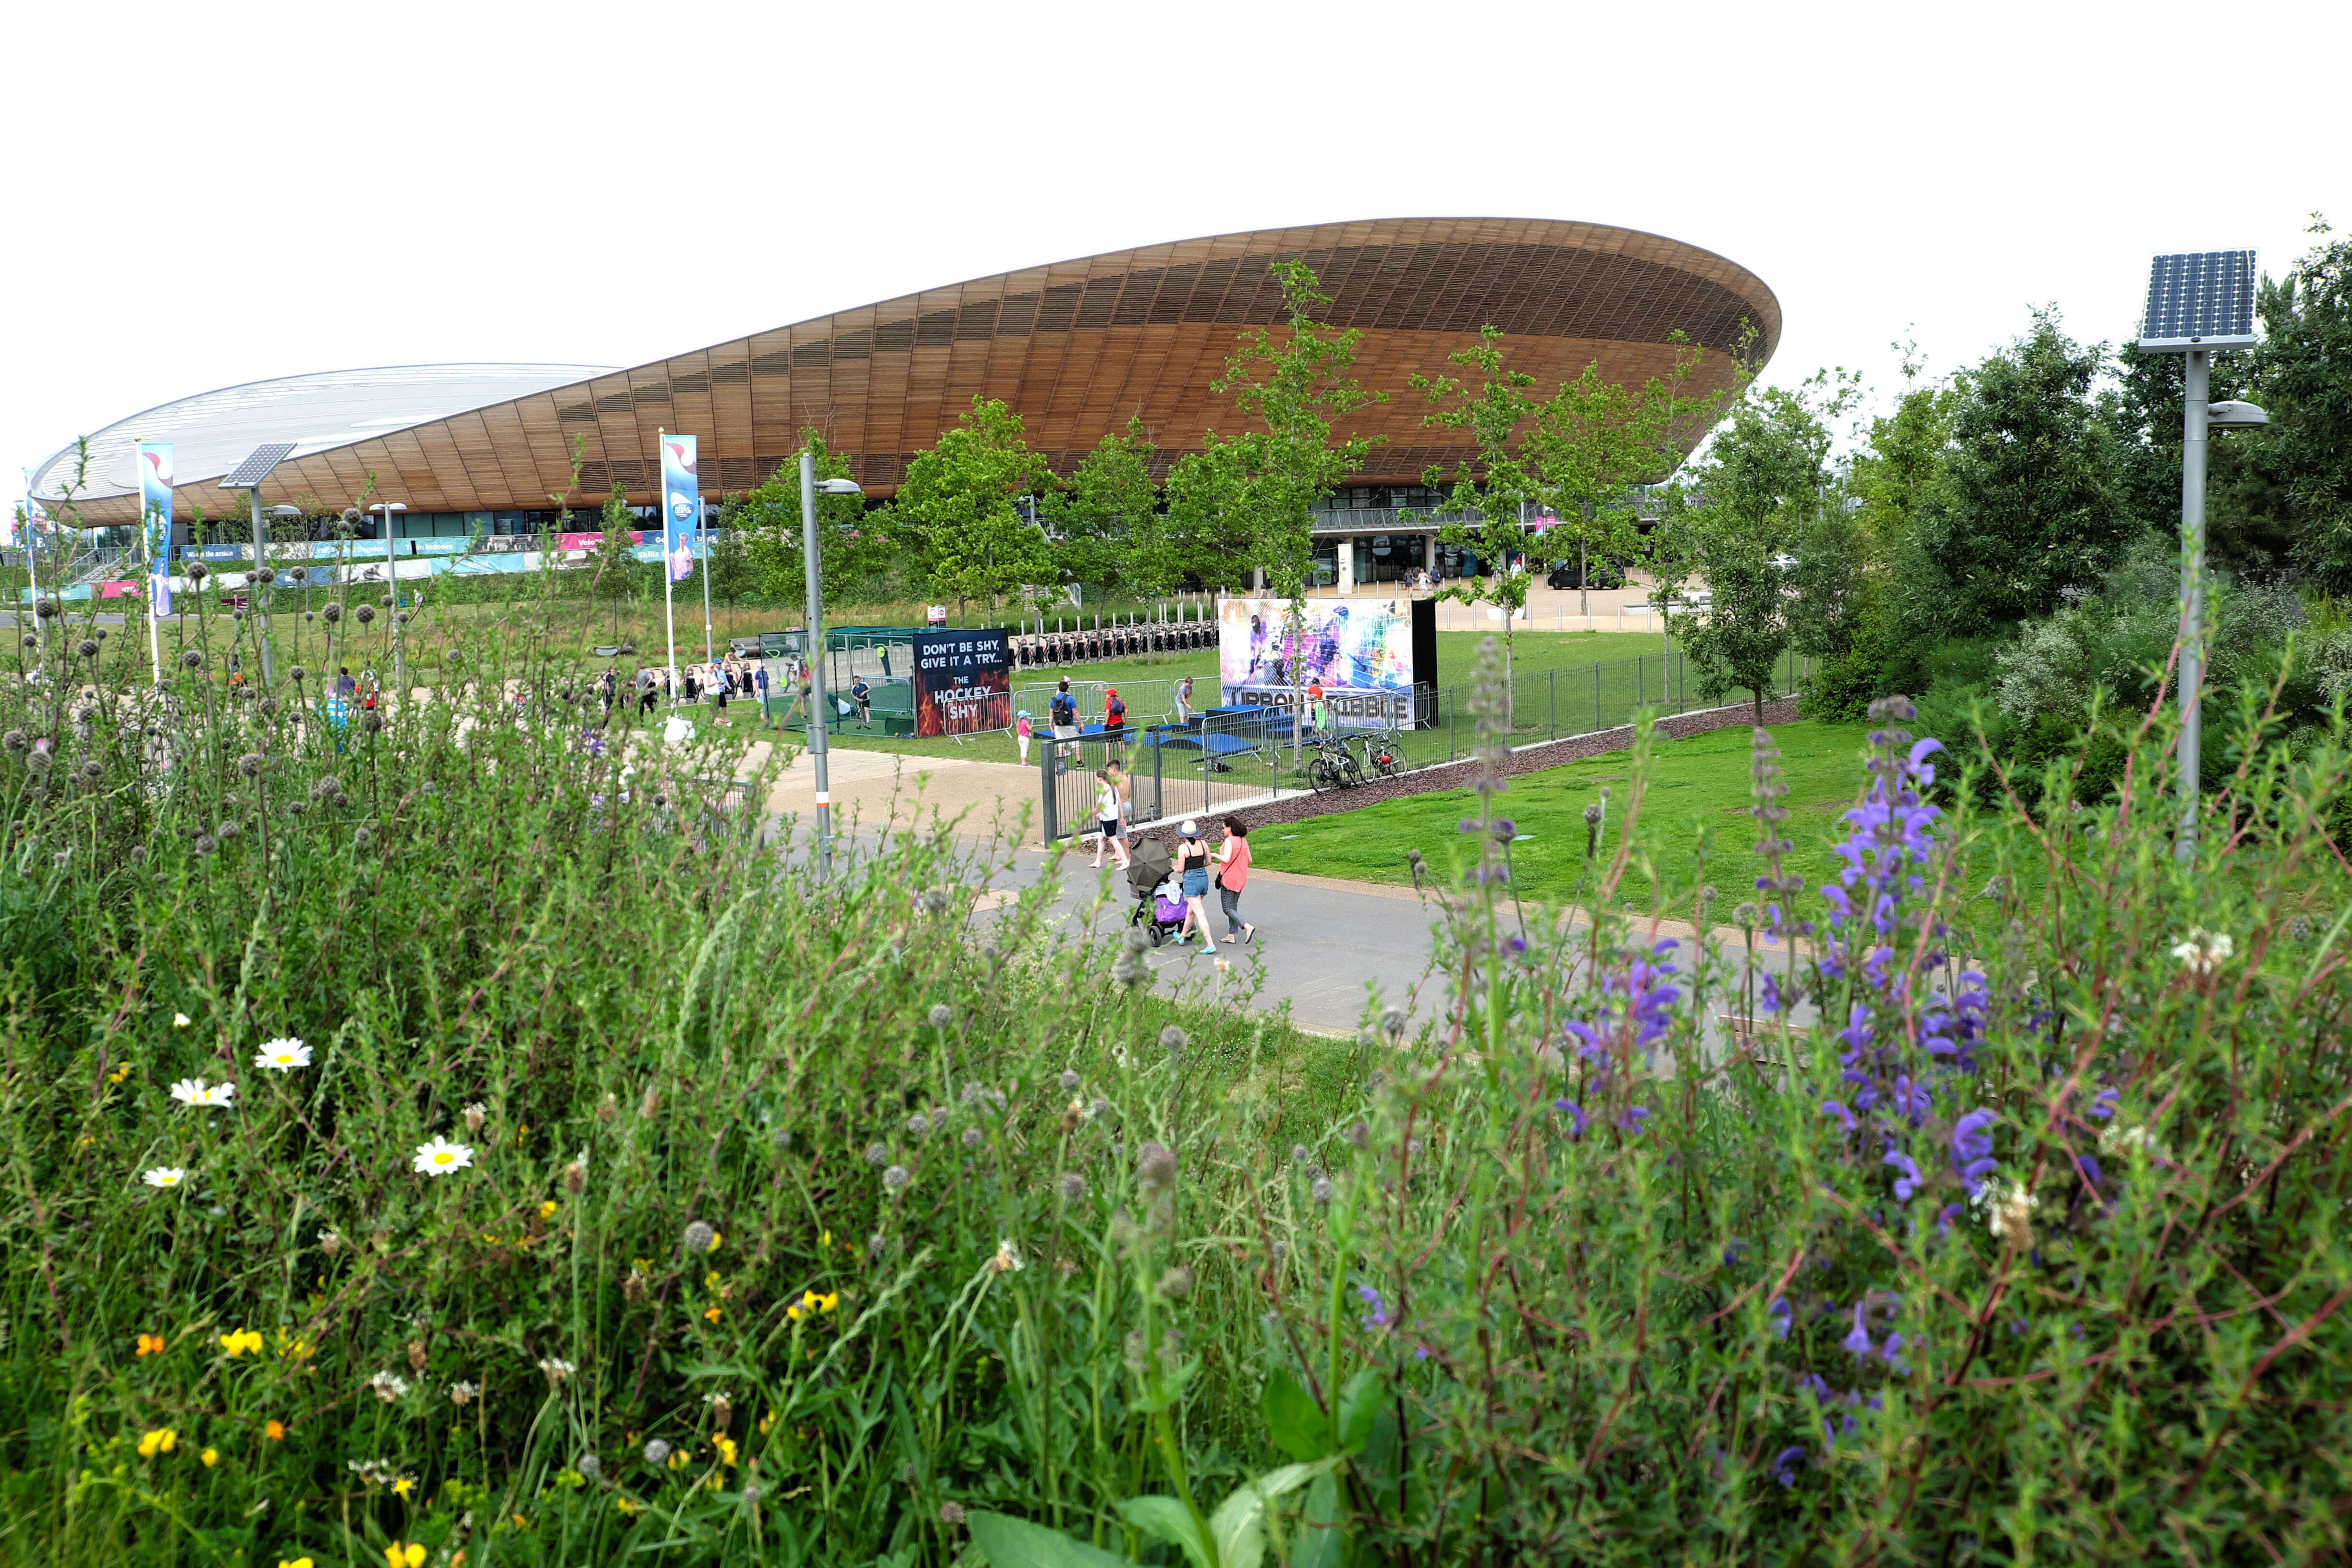 The Lee Valley VeloPark